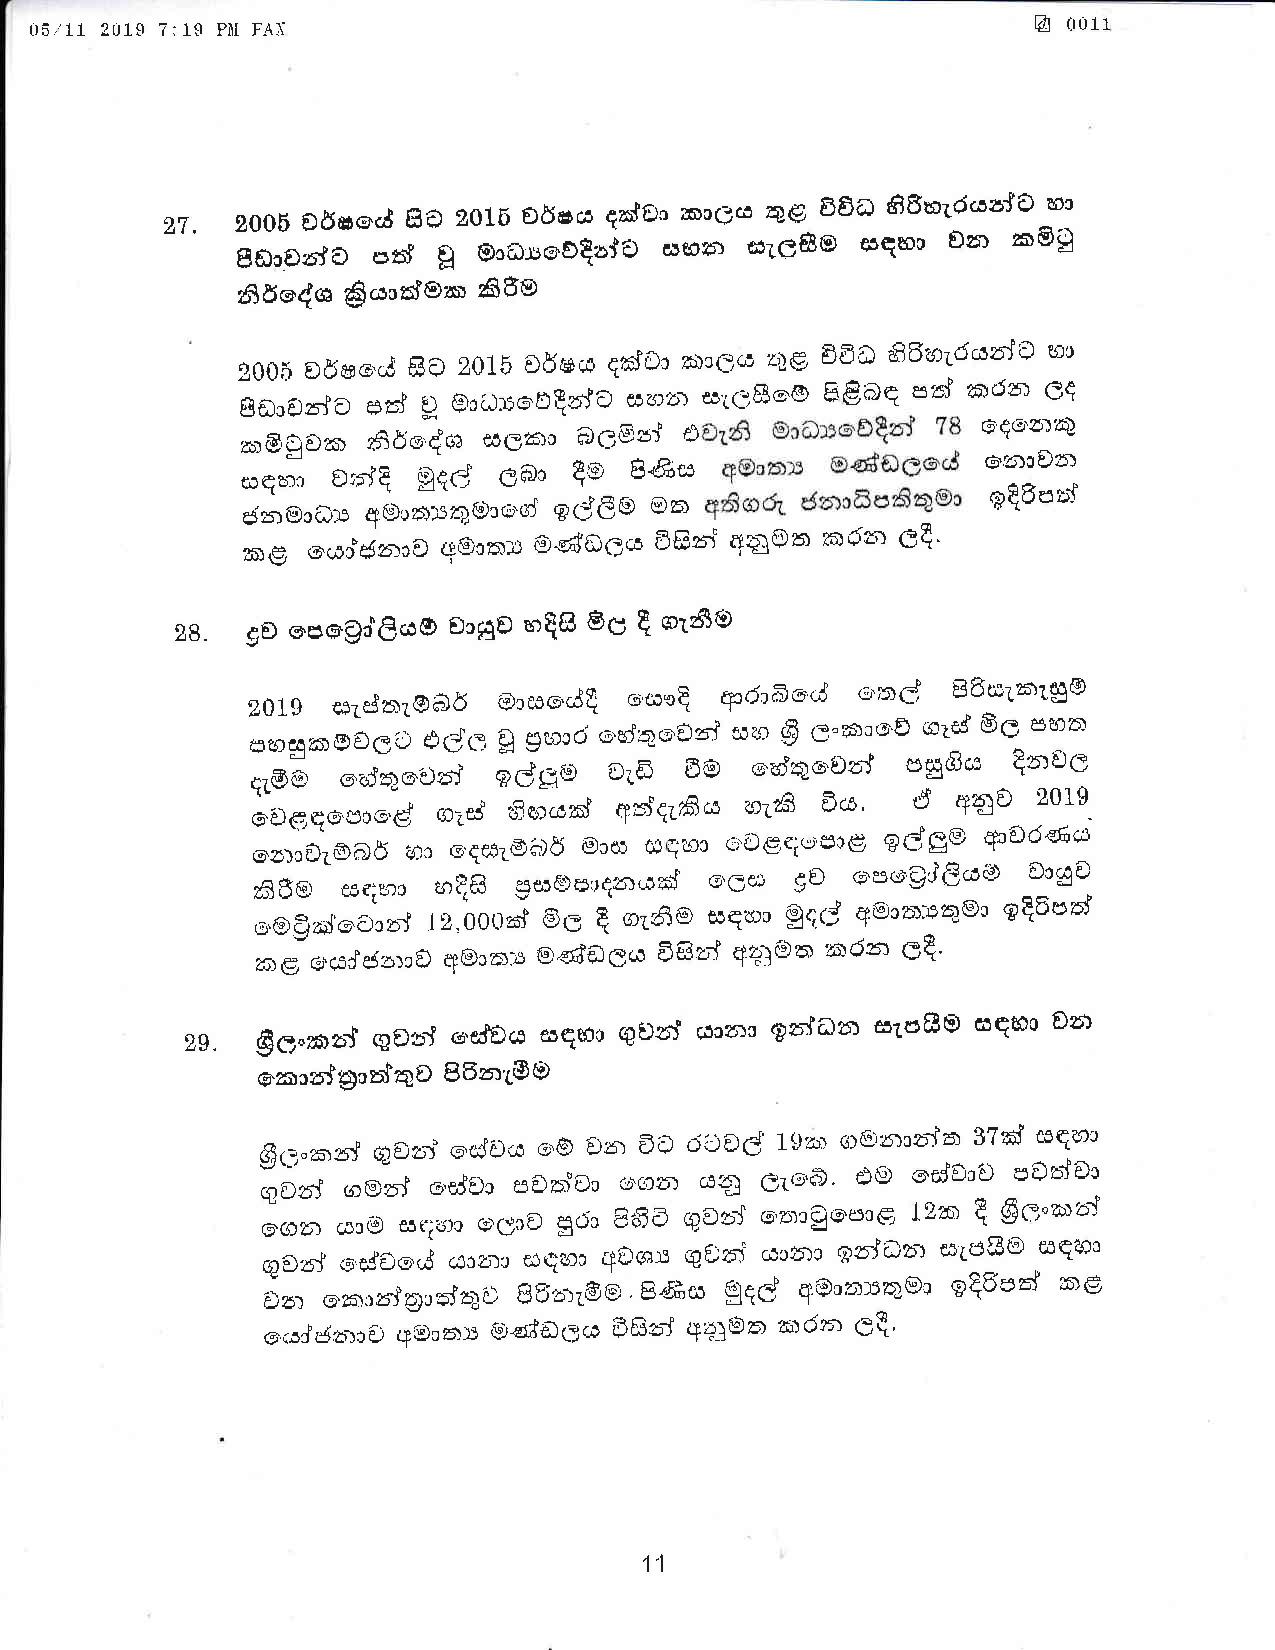 Cabinet Decision on 05.11.2019 page 011